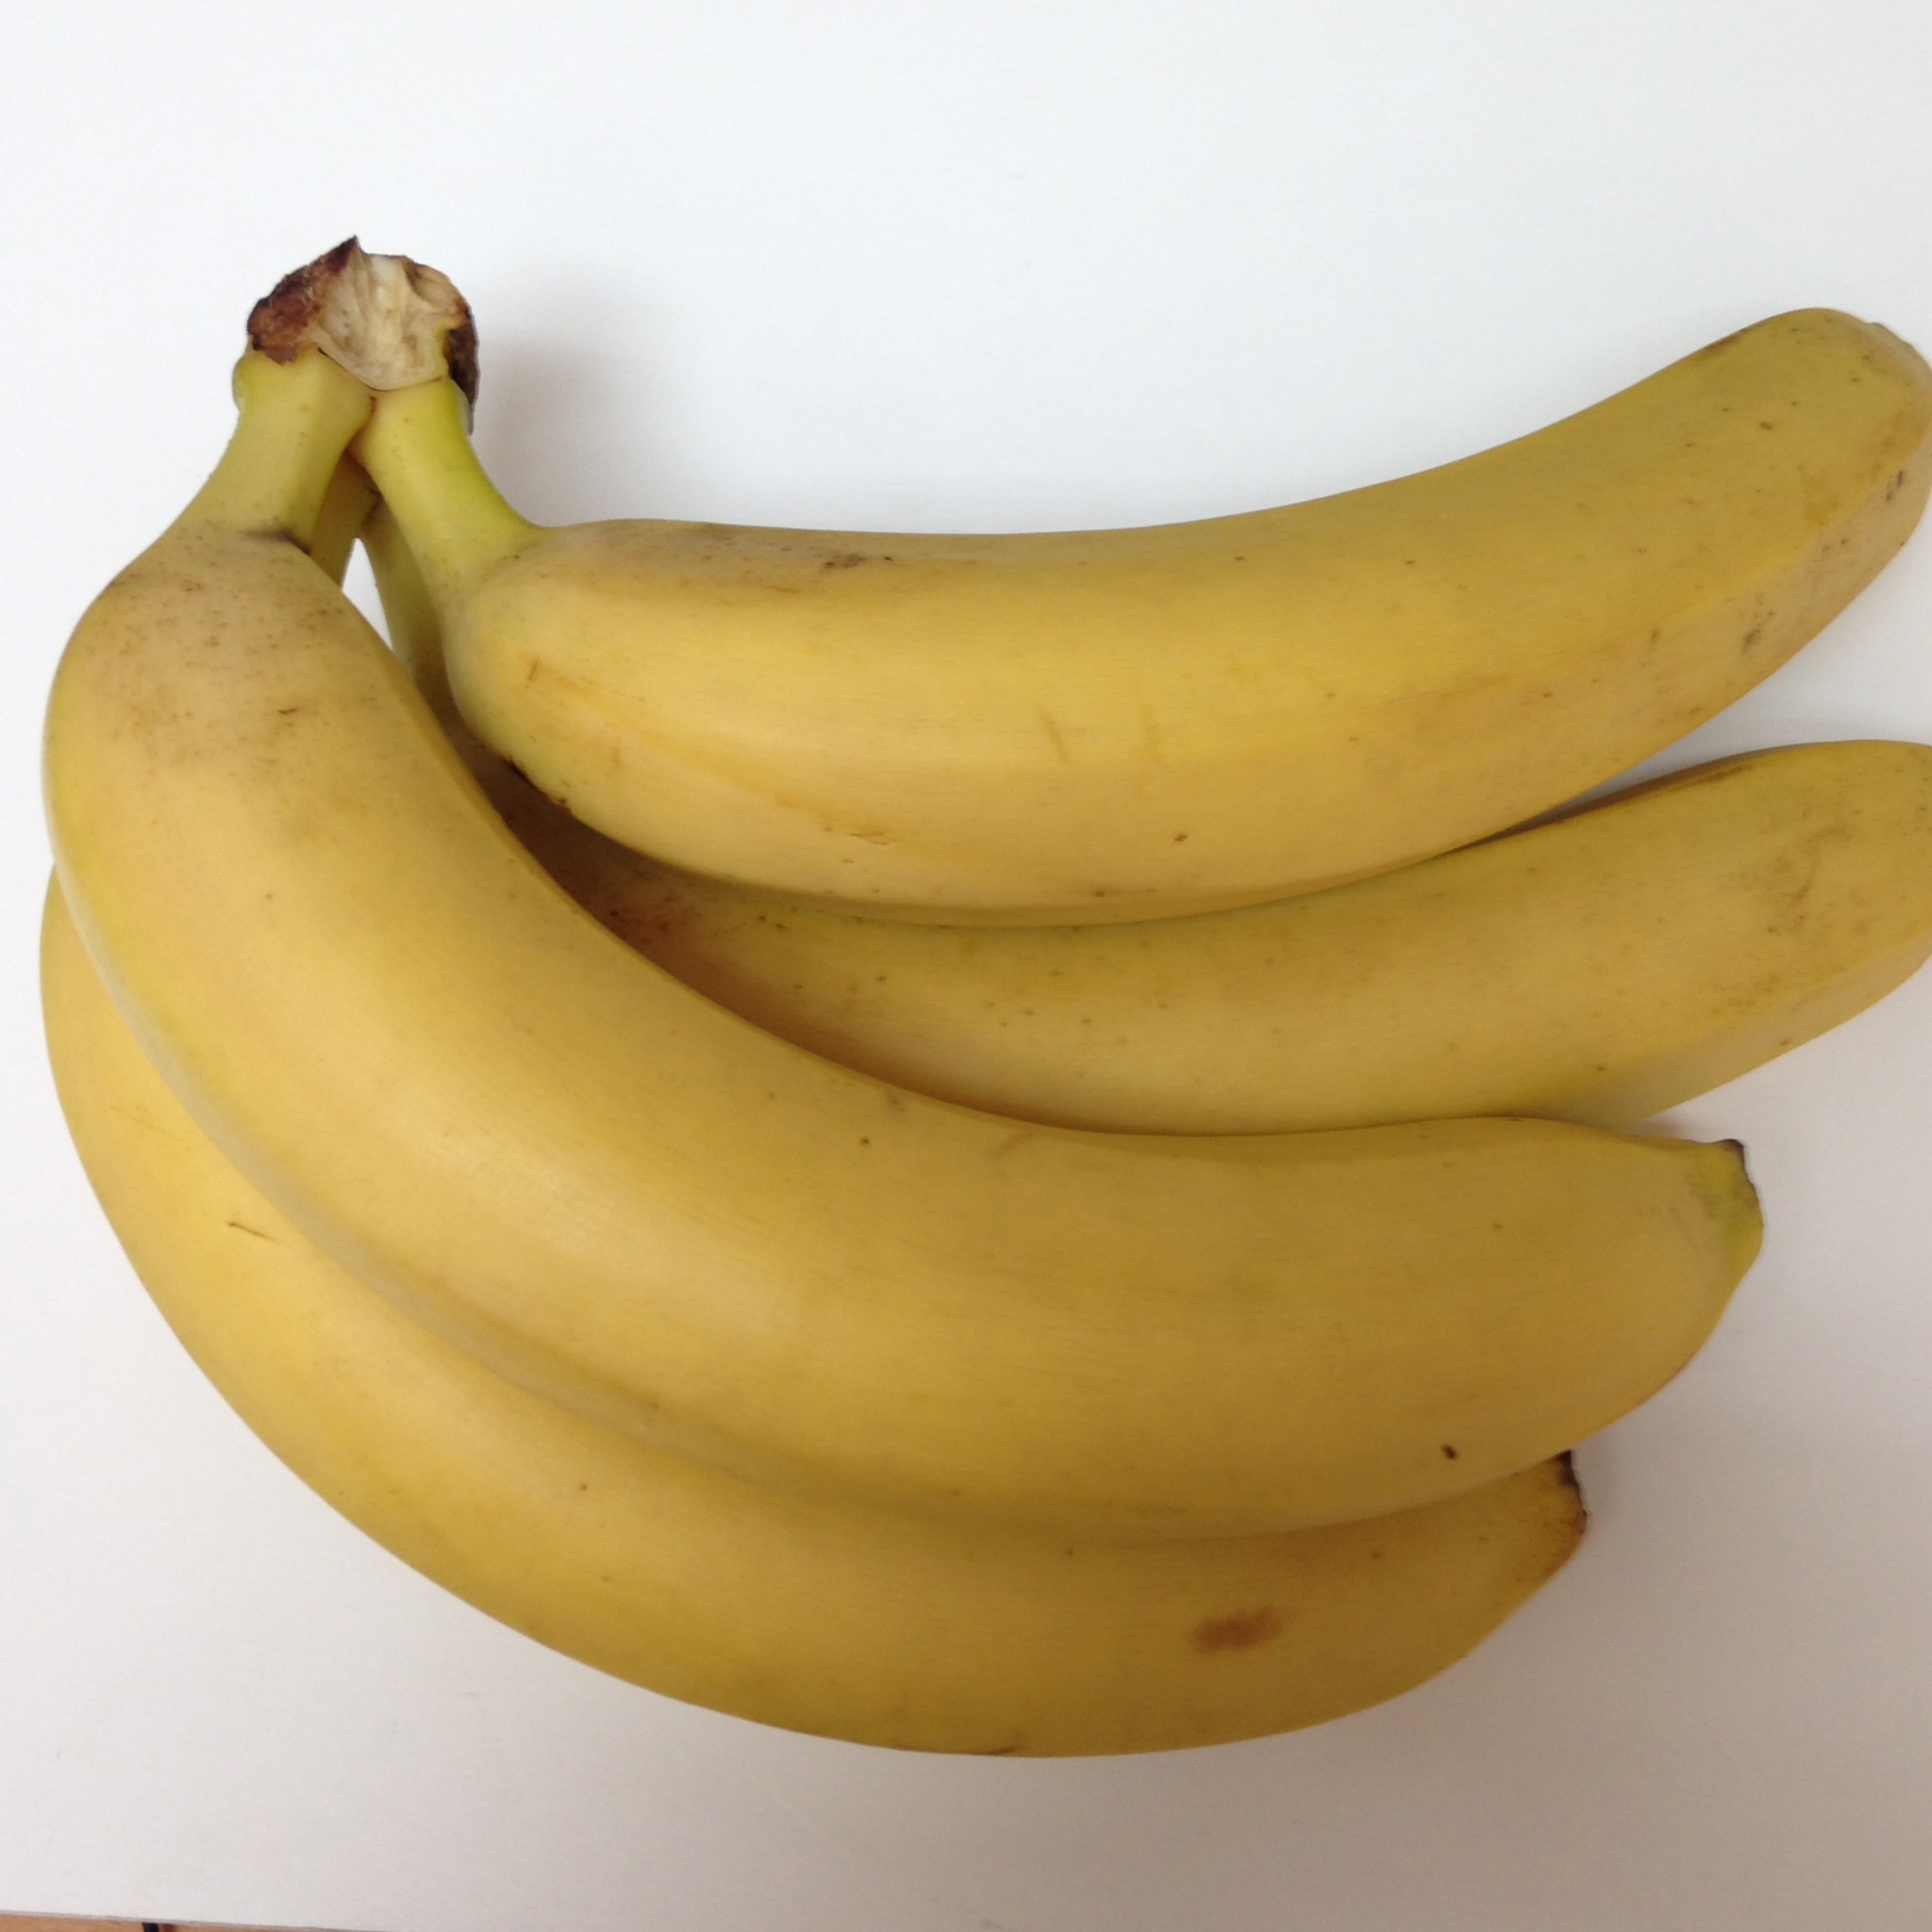 Fresh Del Monte Produce Inc. and a previous distributor must pay a fine of €9.8 million for fixing banana prices between 2000 and 2002, following a decision by the European Union’s highest court.